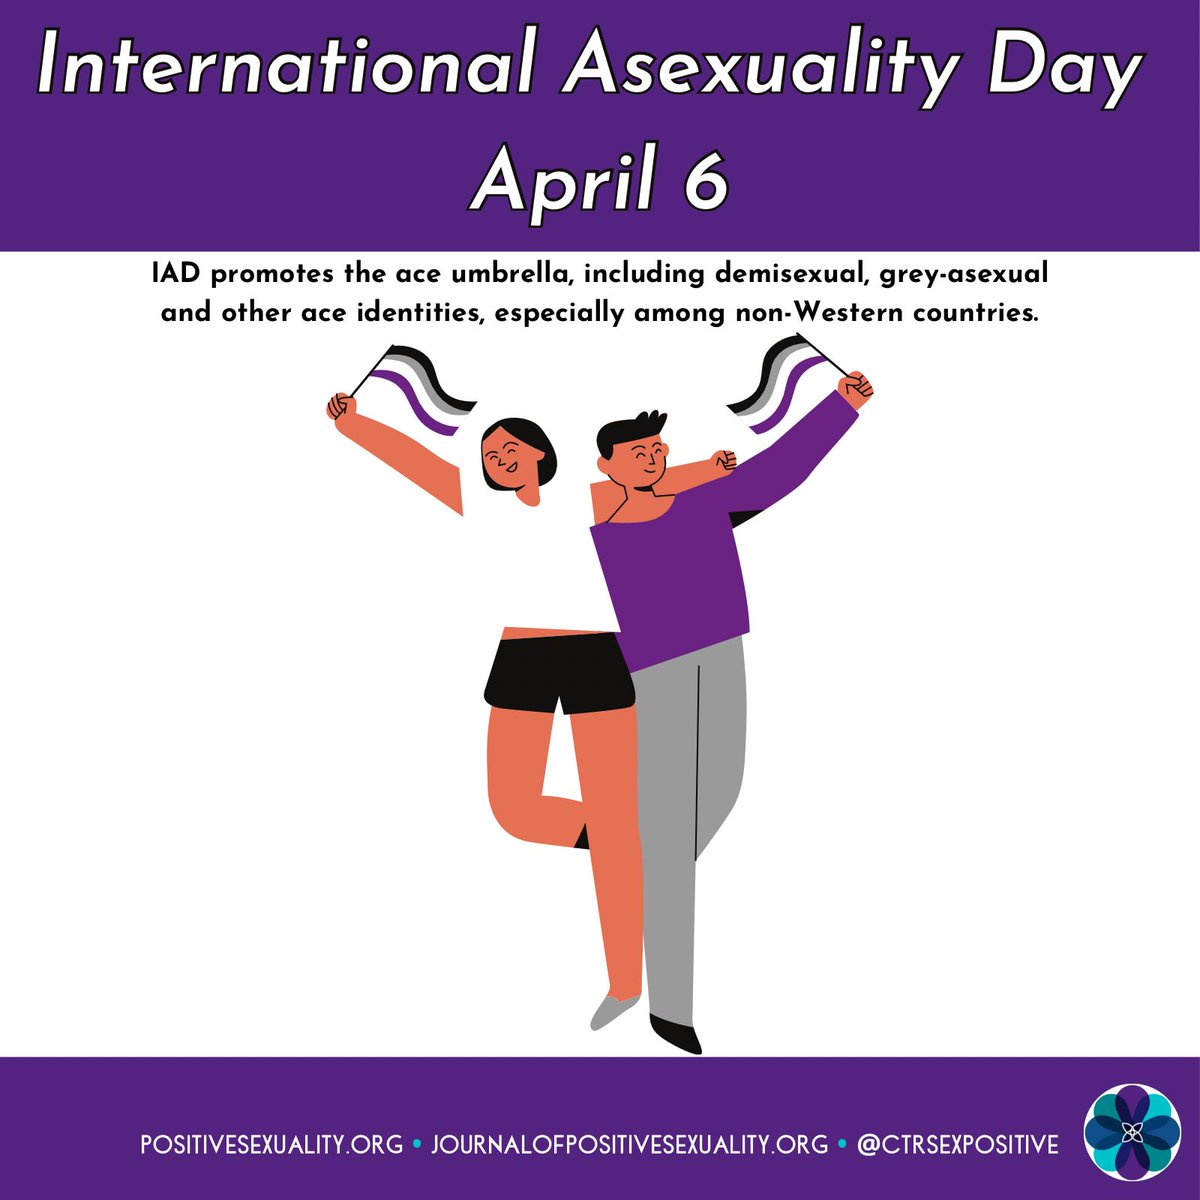 April 6 is International Asexuality Day! IAD promotes the ace umbrella, including demisexual, grey-asexual and other ace identities, especially among non-Western countries. #AsexualitySpectrum #IAD #InternationalAsexualityDay #Asexual #Demisexual #Greyasexual #PositiveSexuality